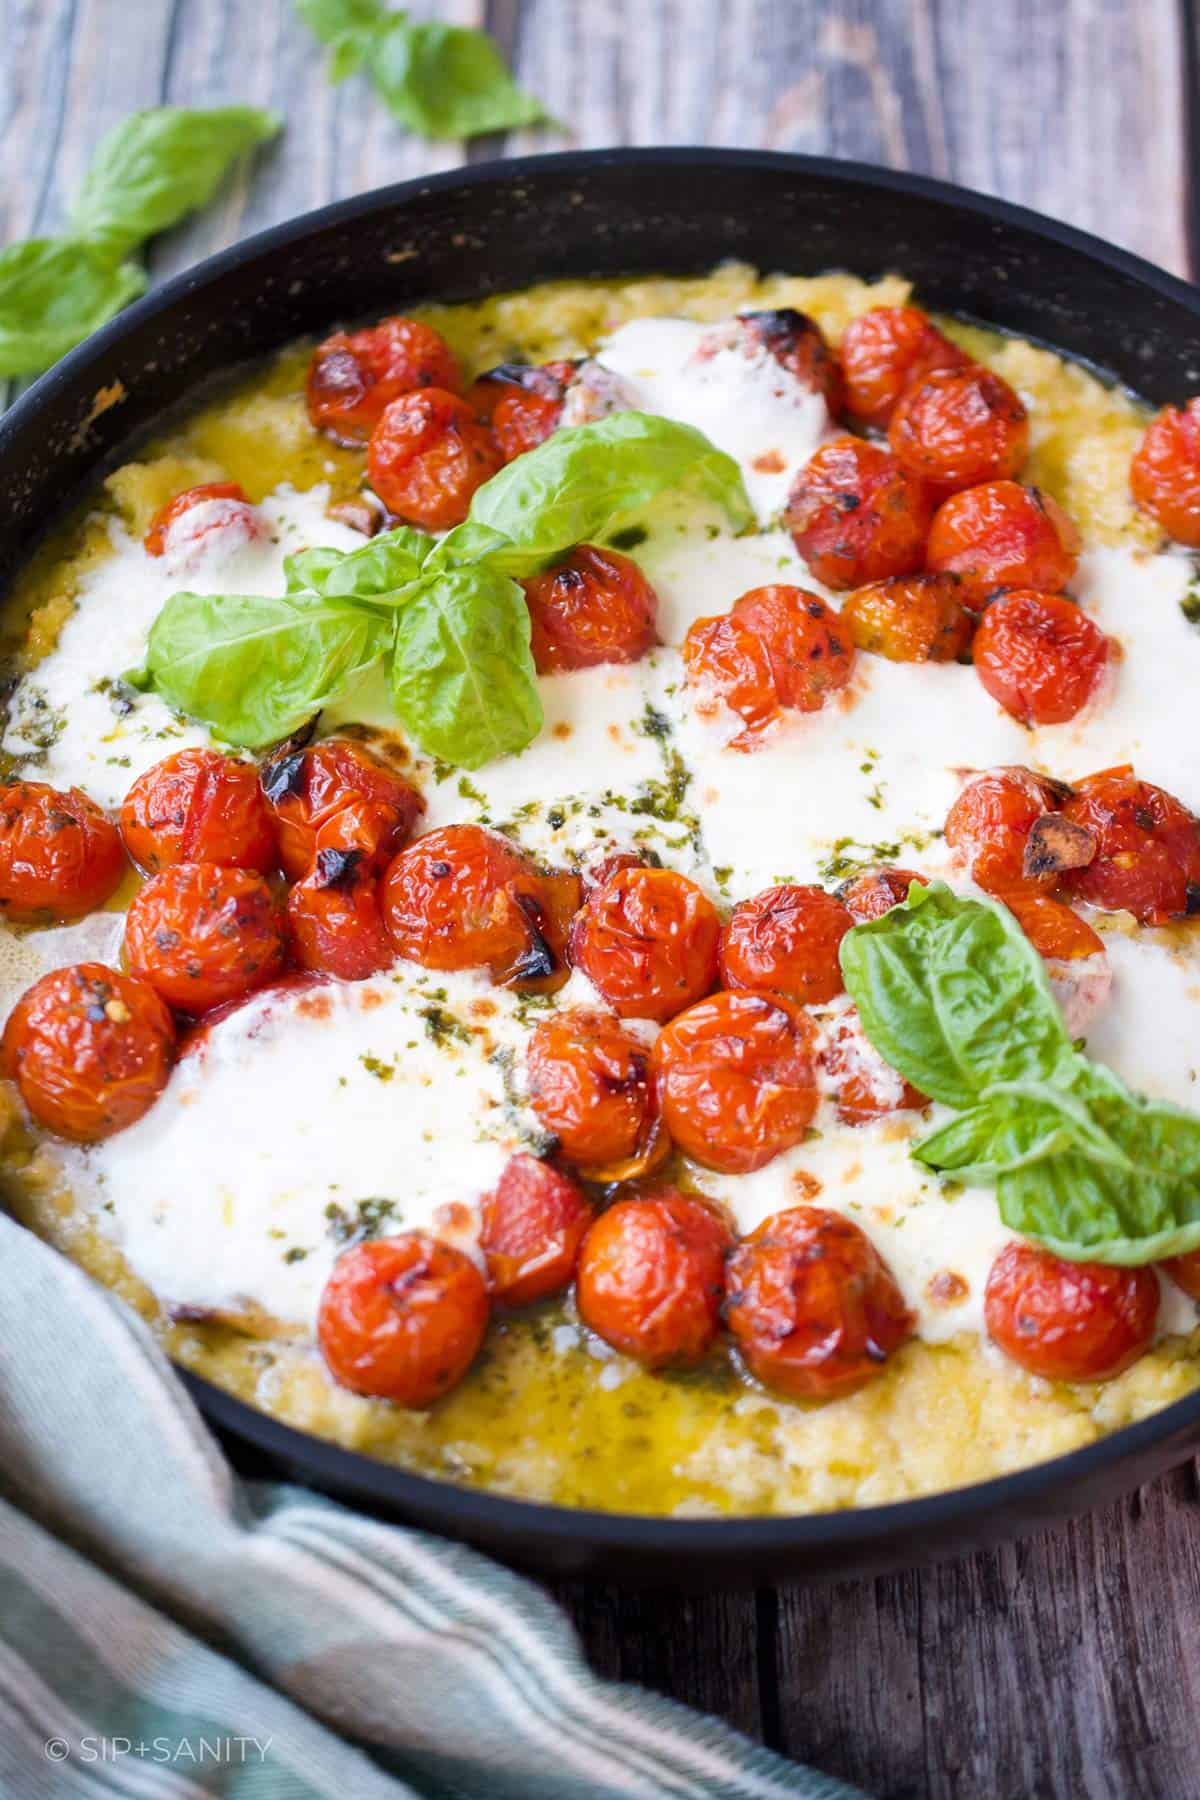 A skillet of polenta, tomatoes and burrata on a wooden table.